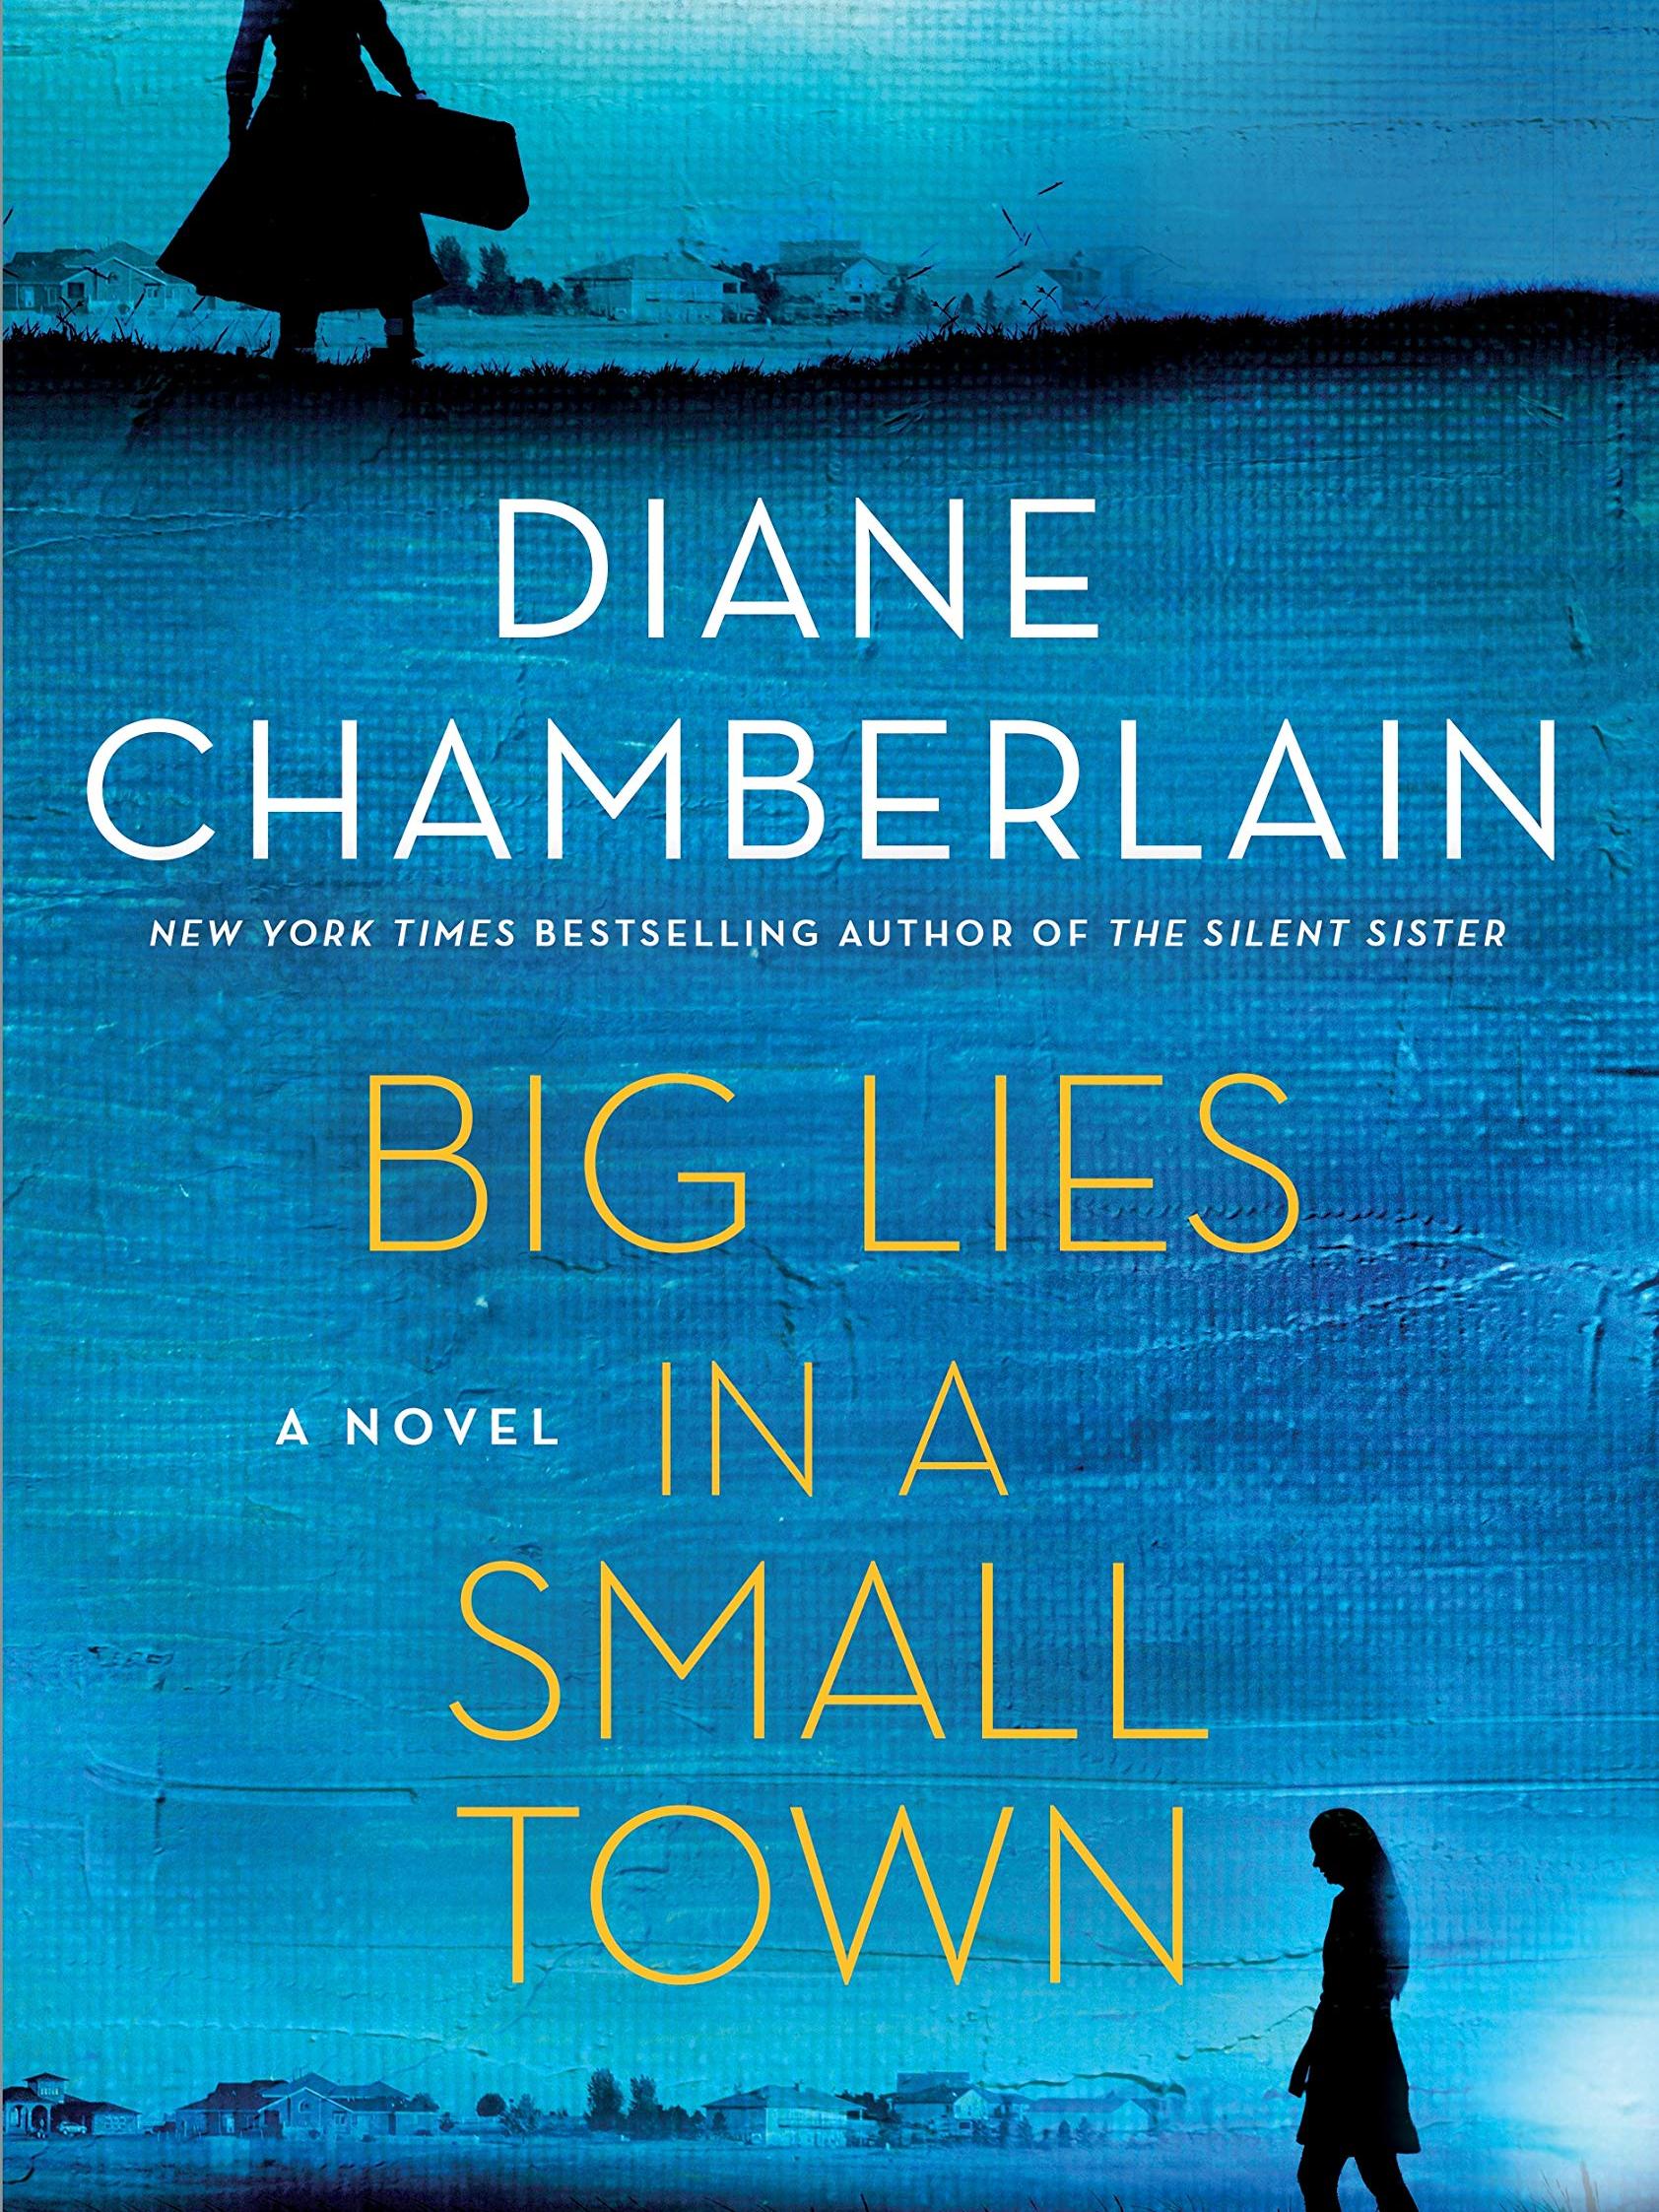 Big Lies in a Small Town by Diane Chamberlin